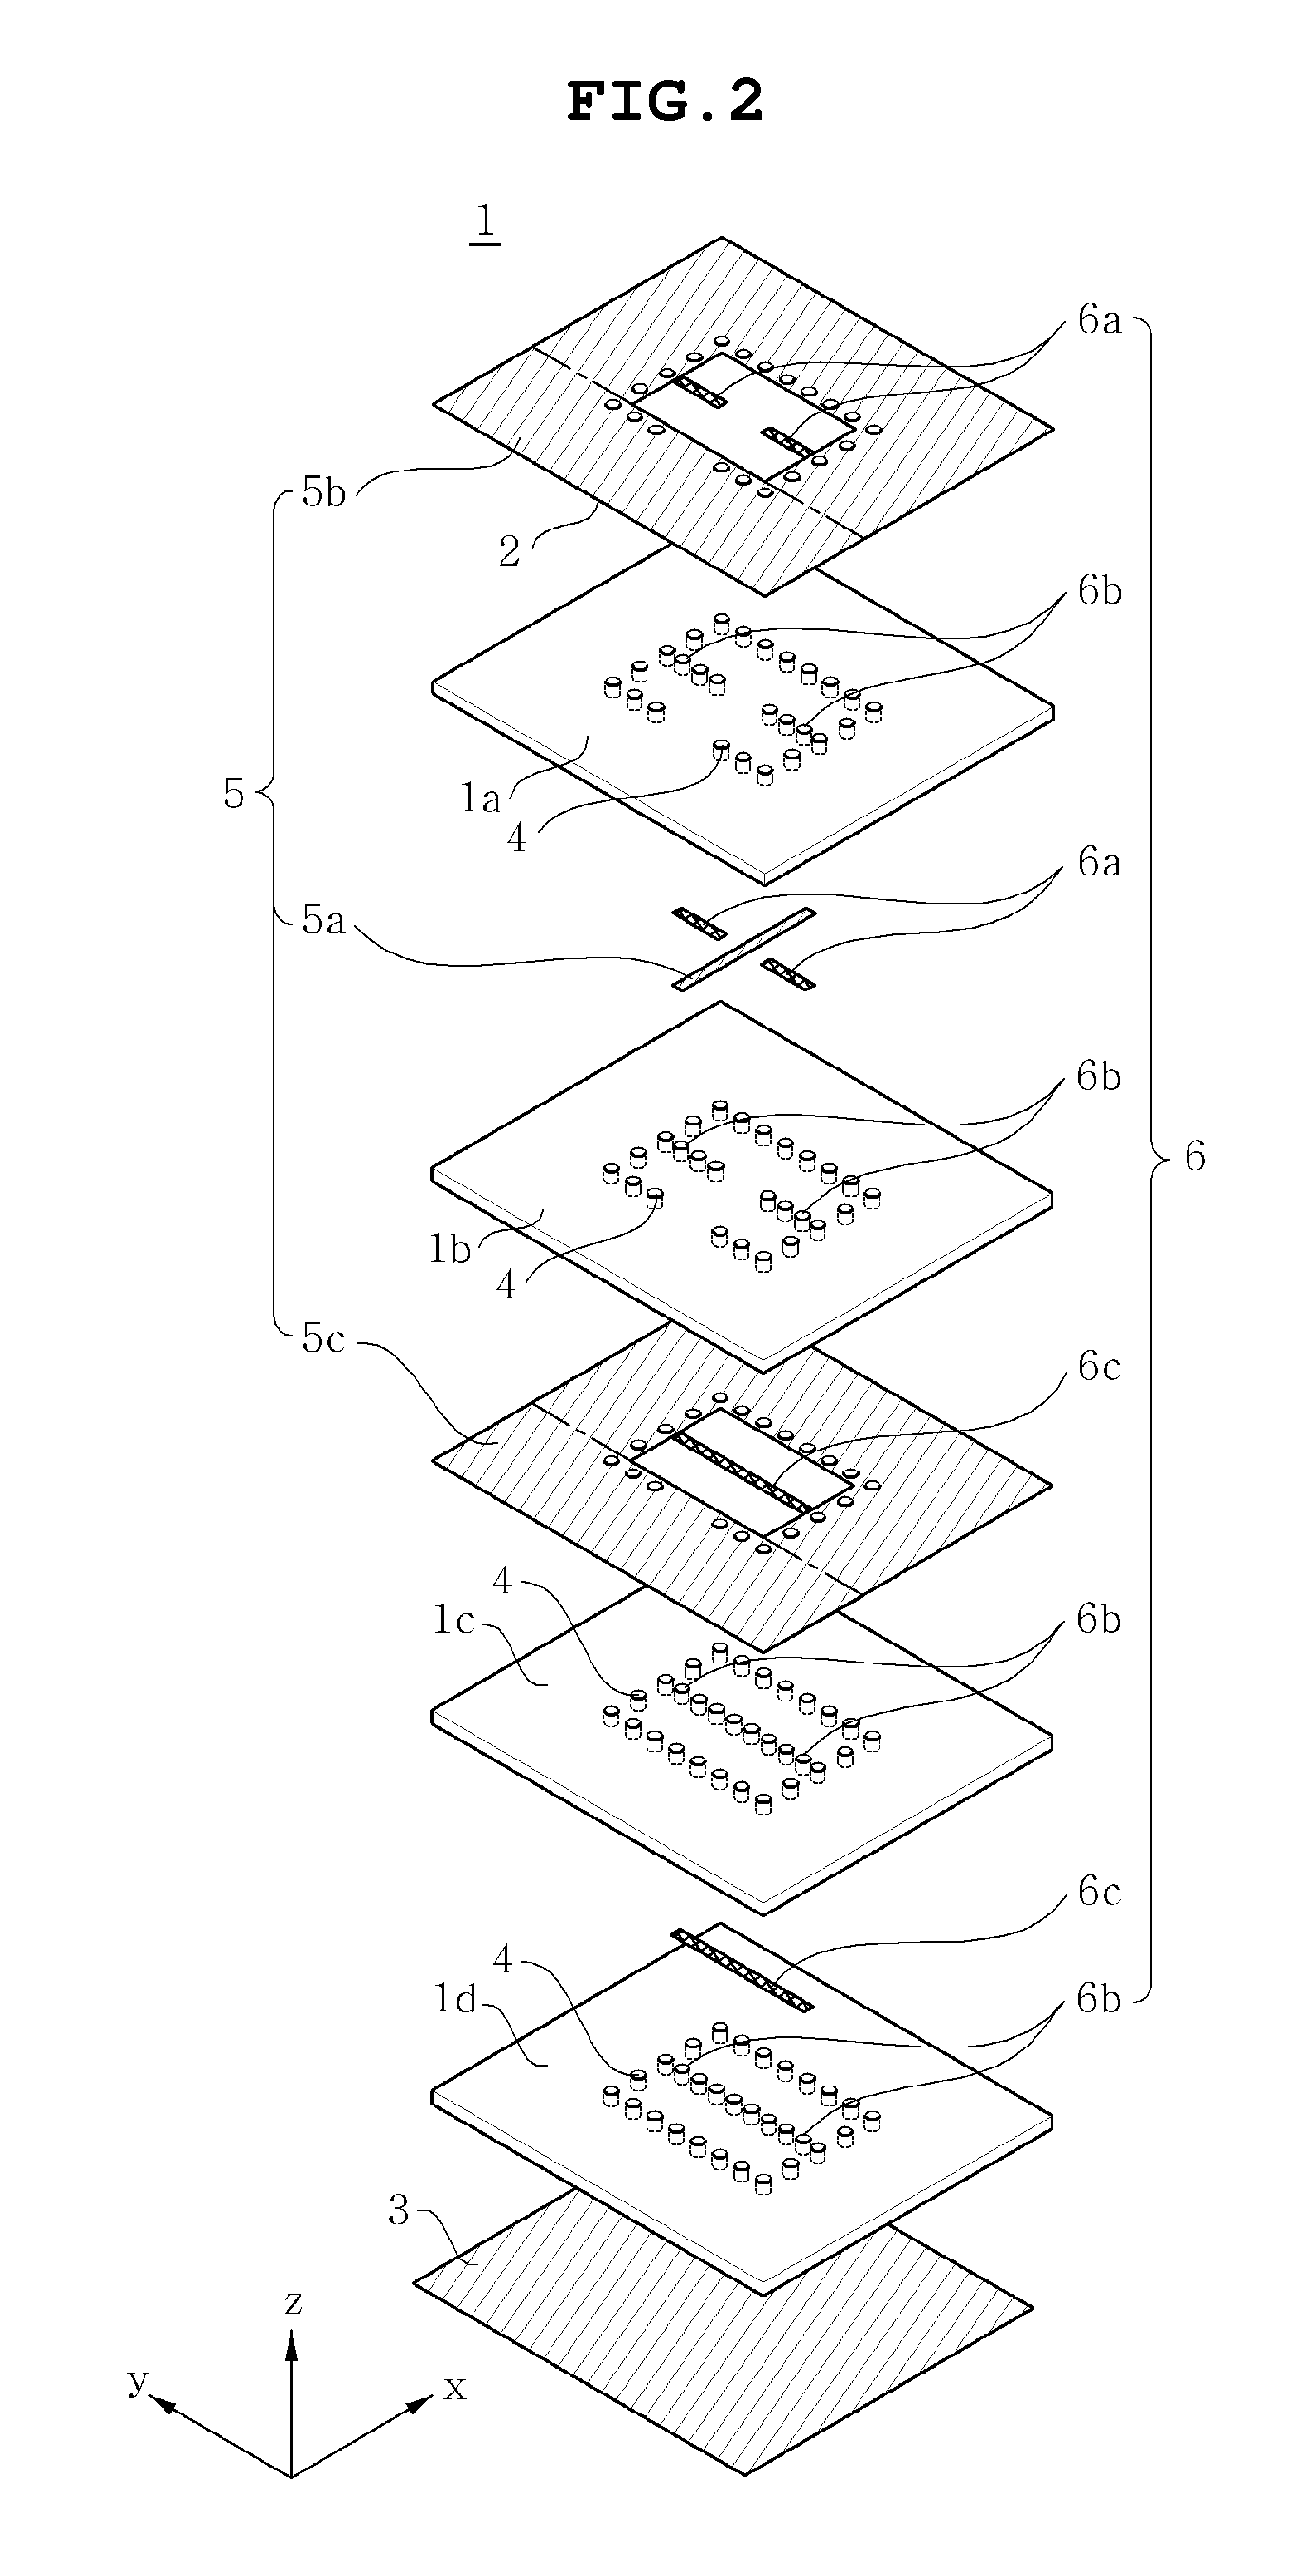 Dielectric resonator antenna embedded in multilayer substrate for enhancing bandwidth